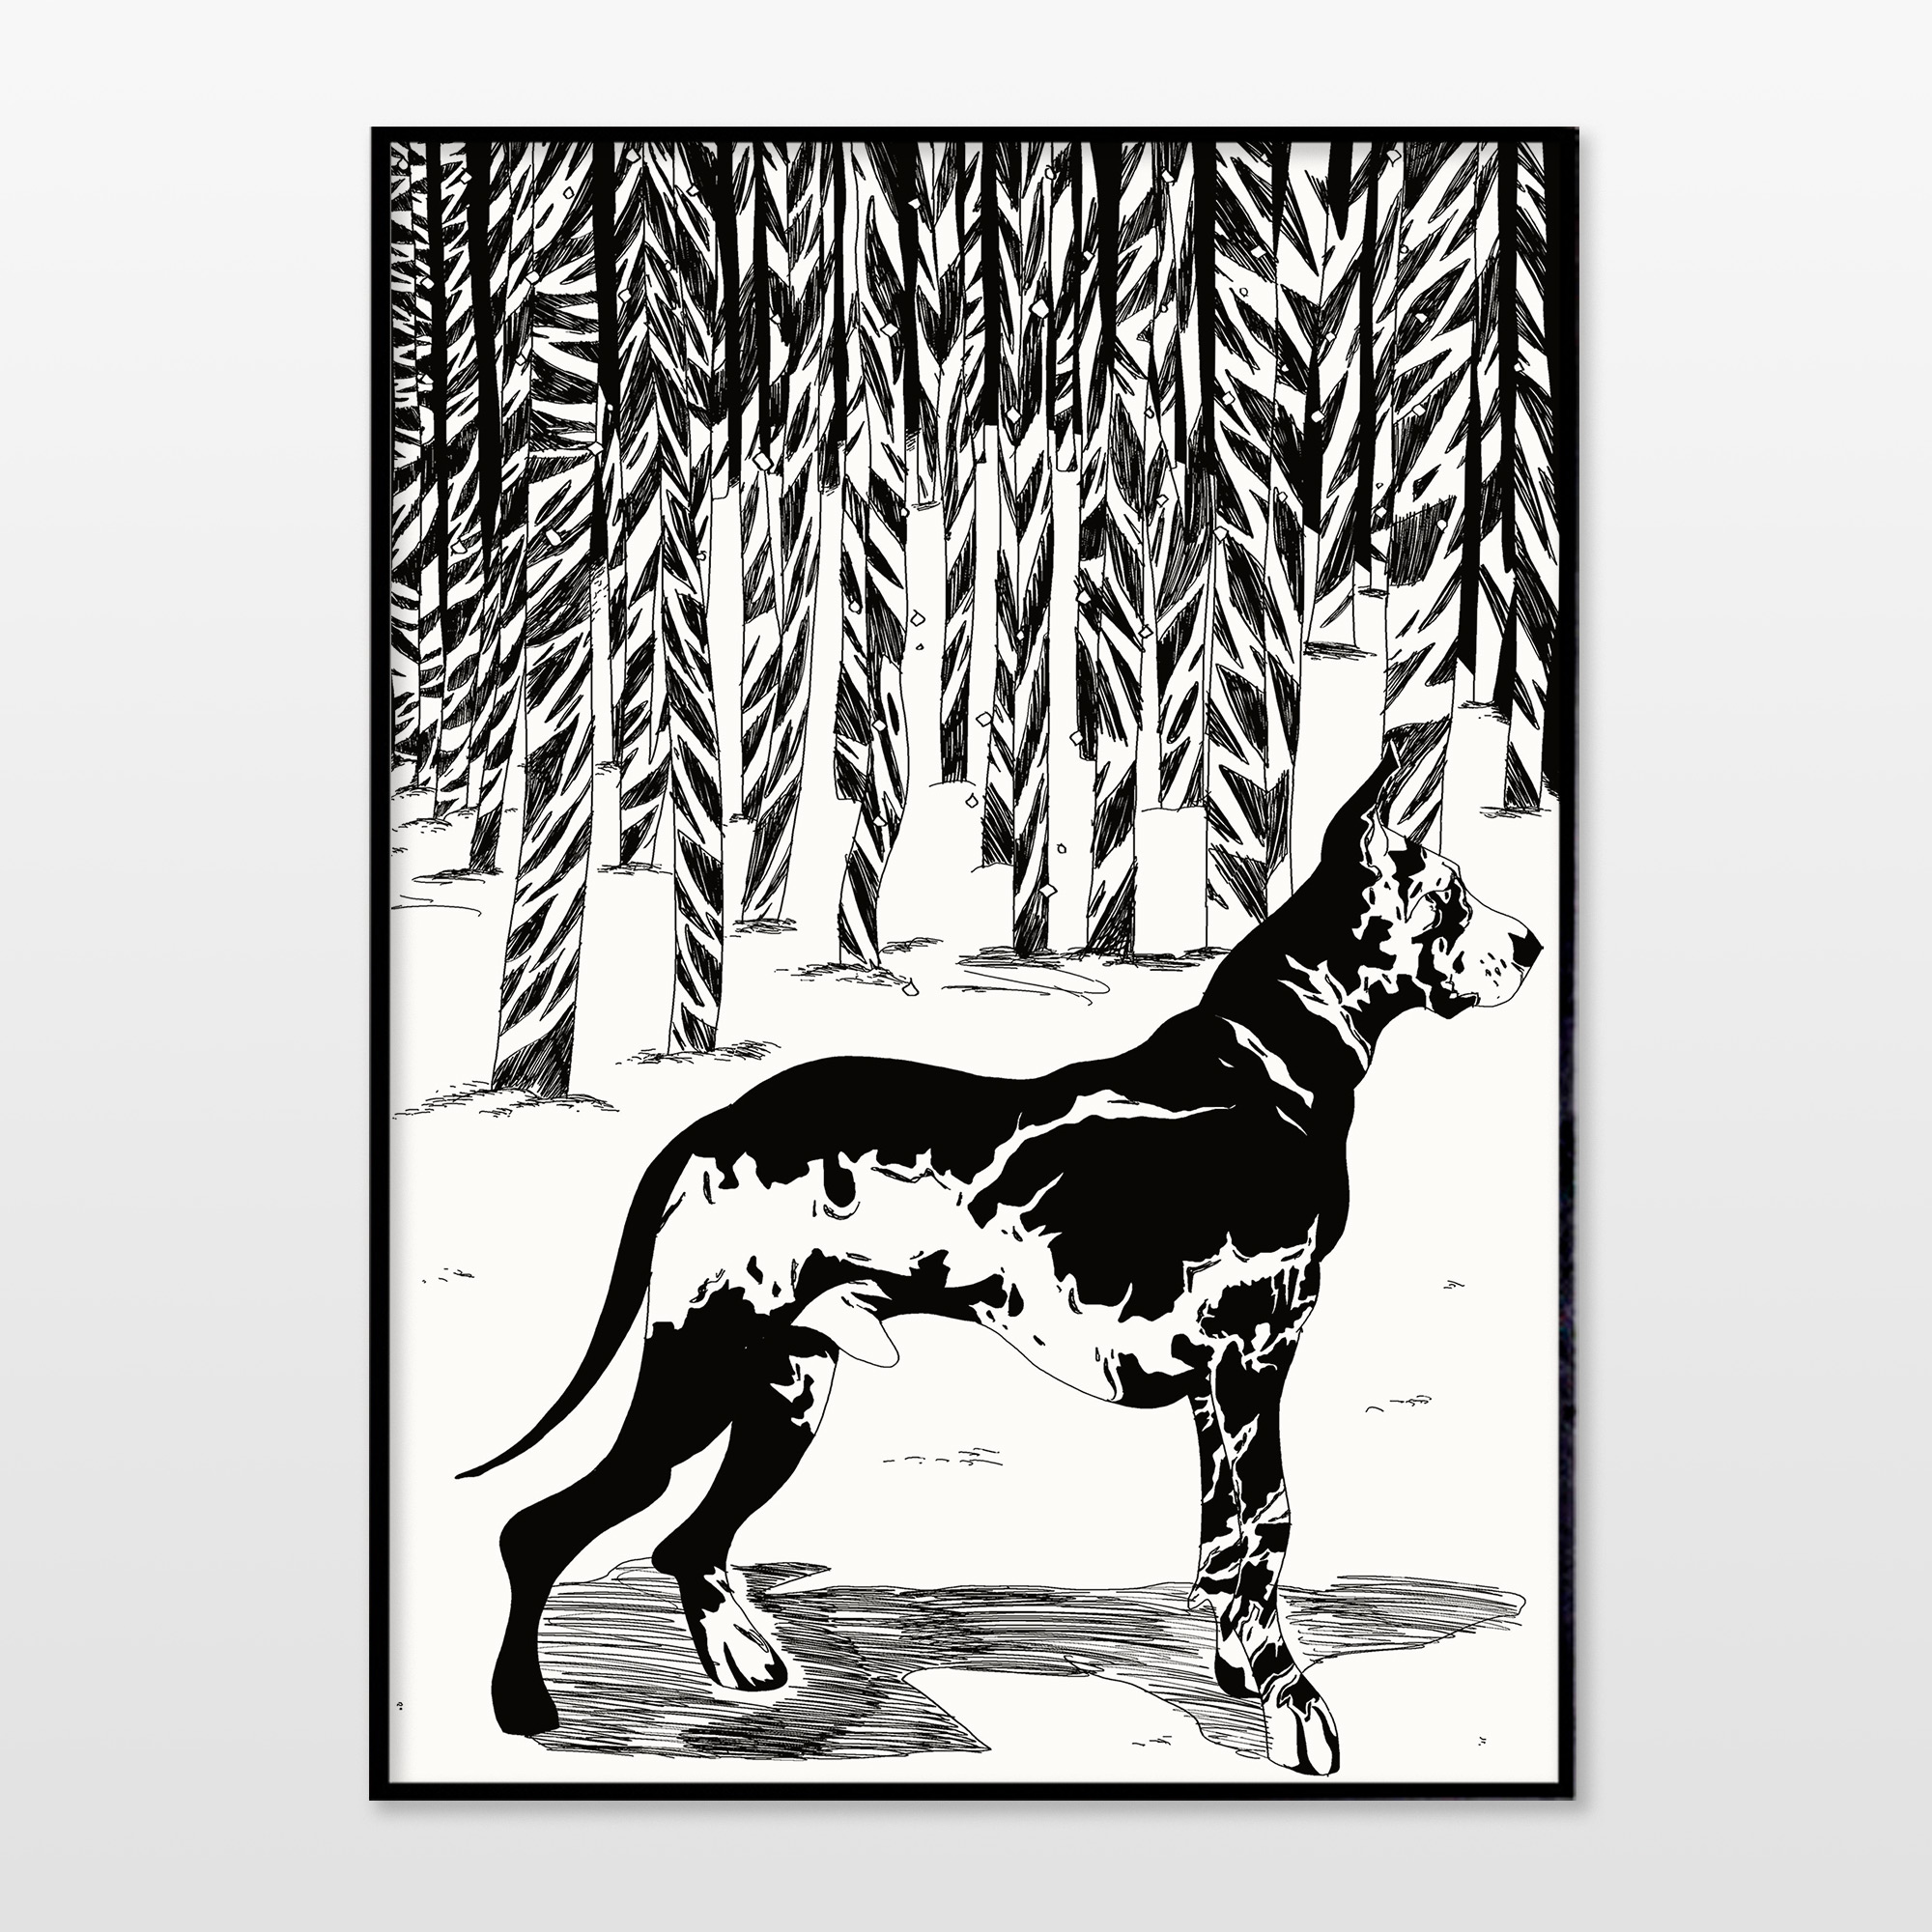 posters-prints, giclee-print, graphical, illustrative, landscape, monochrome, botany, cartoons, nature, pets, seasons, black, white, ink, paper, black-and-white, contemporary-art, danish, decorative, design, dogs, interior, interior-design, modern, modern-art, nordic, posters, prints, scandinavien, scenery, sketch, wild-animals, Buy original high quality art. Paintings, drawings, limited edition prints & posters by talented artists.